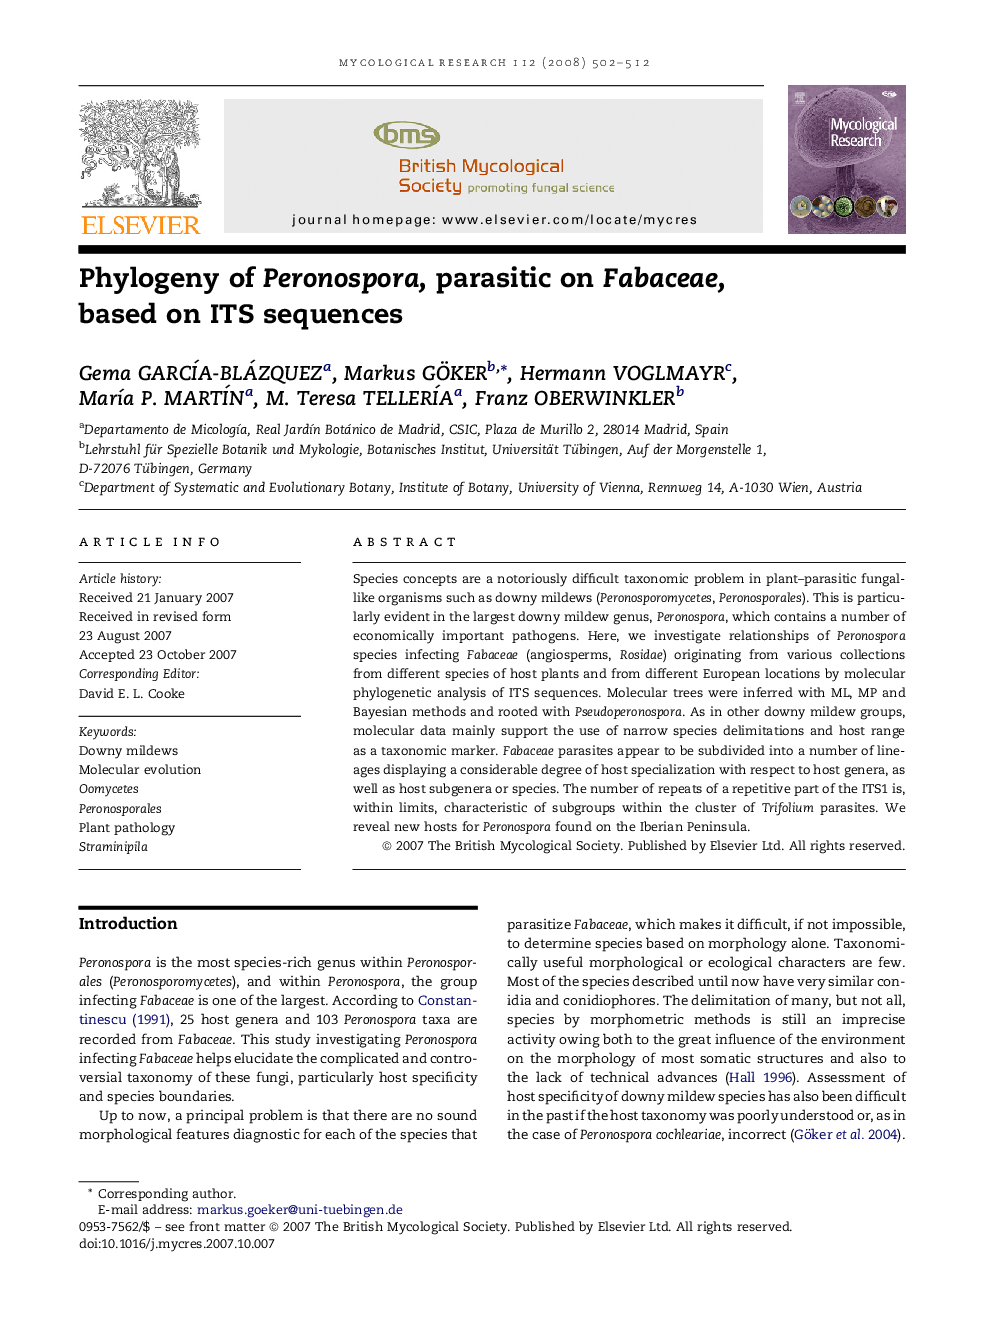 Phylogeny of Peronospora, parasitic on Fabaceae, based on ITS sequences